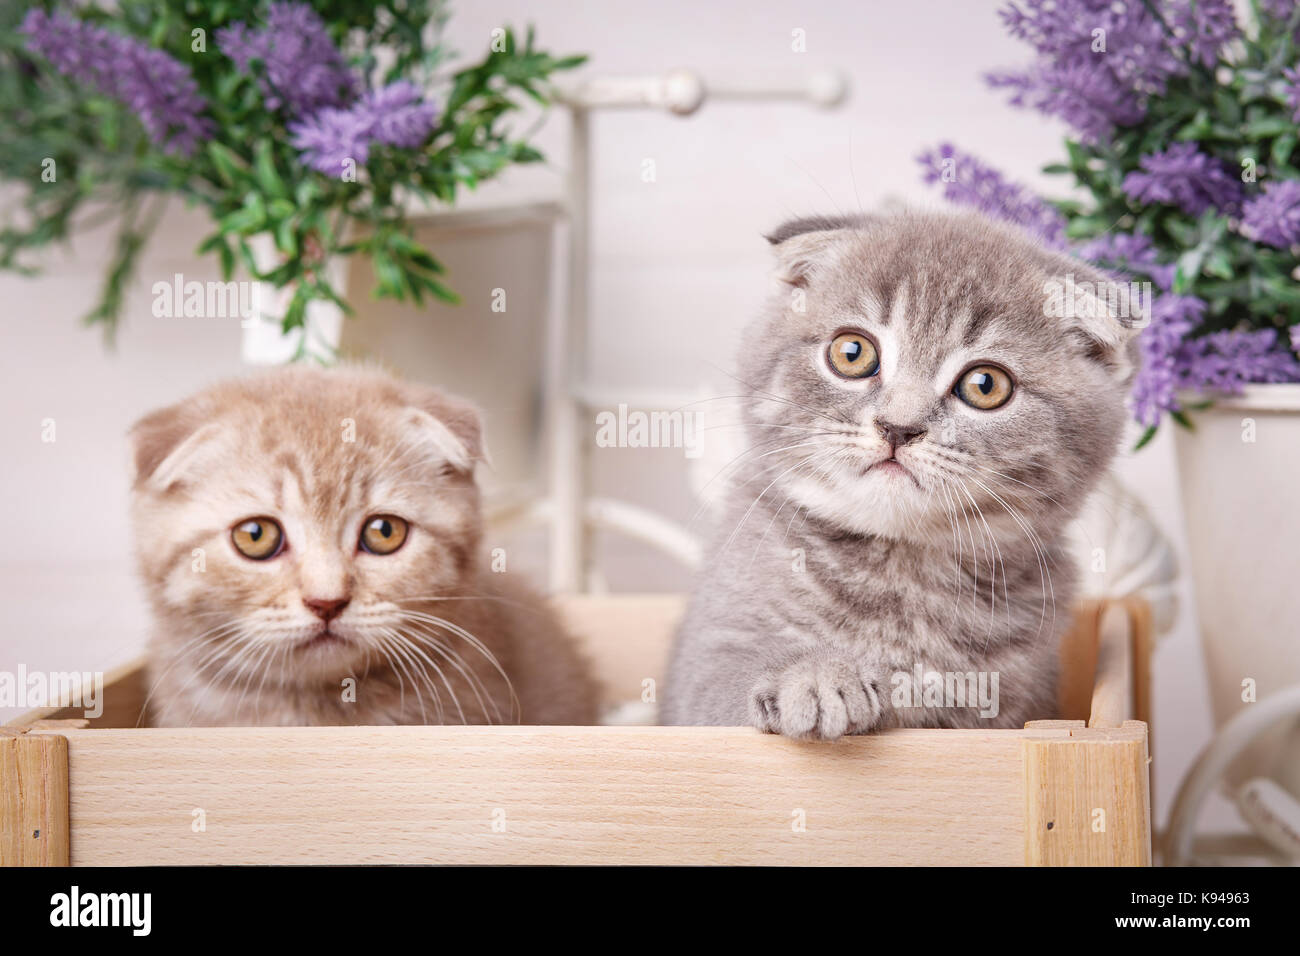 Couple of cute cats in a wooden box. Lavender flowers in the background Stock Photo